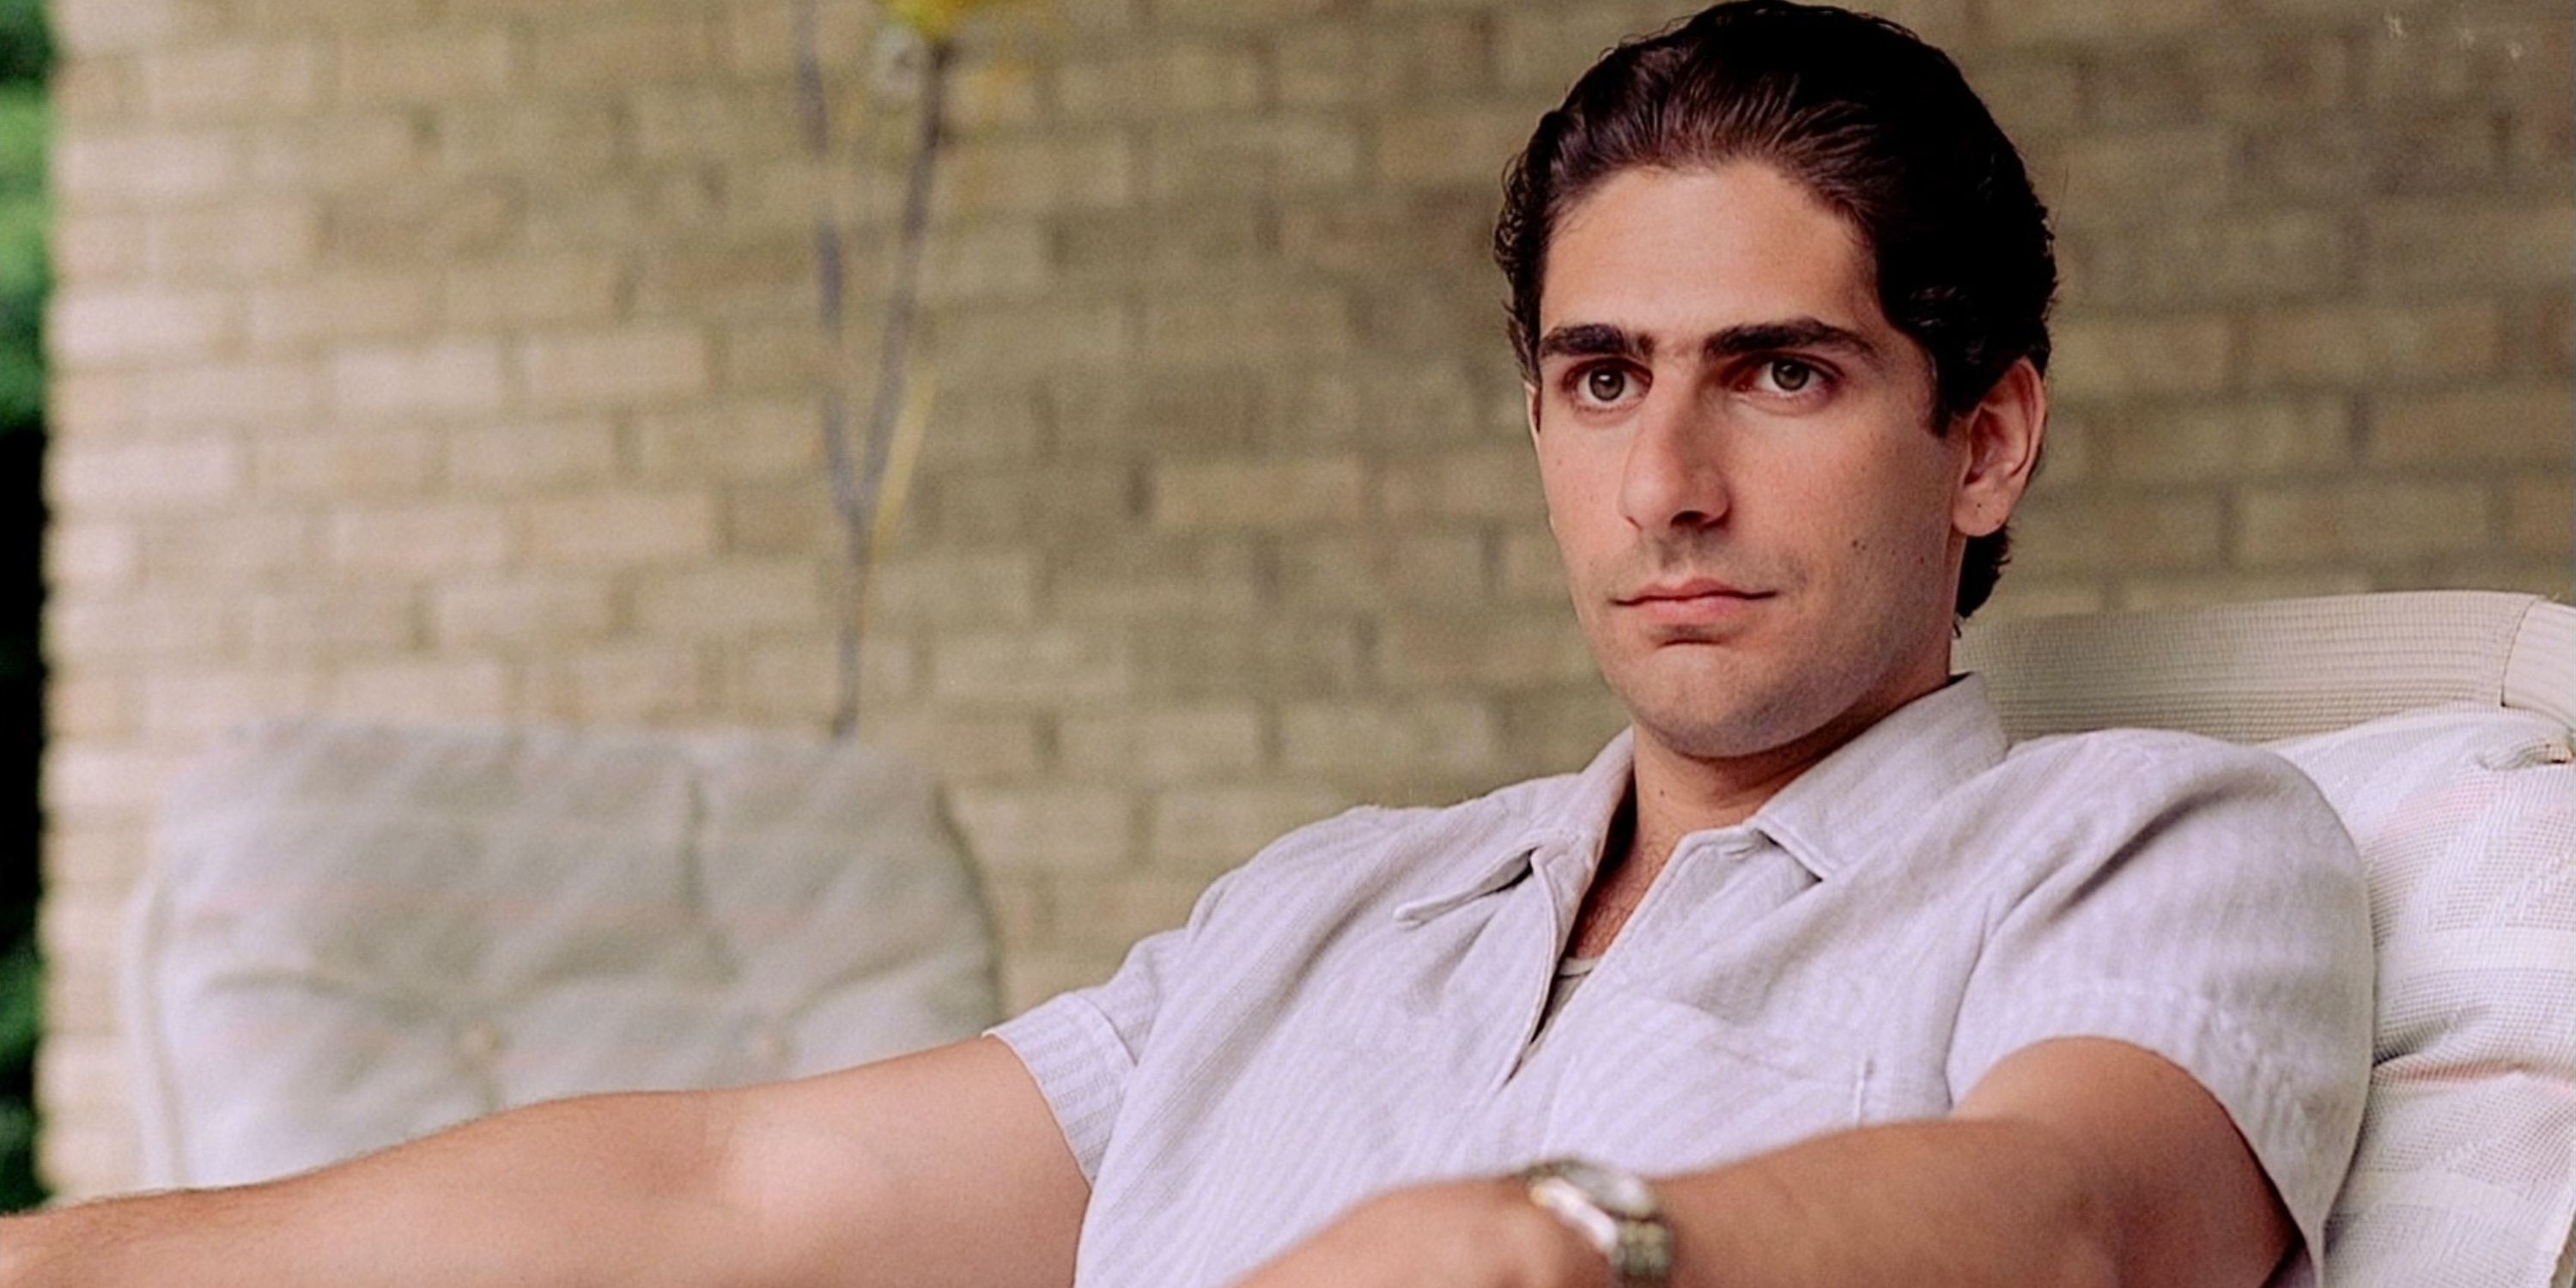 Michael Imperioli as Christopher Moltisanti sitting on a chair and looking intently in The Sopranos.